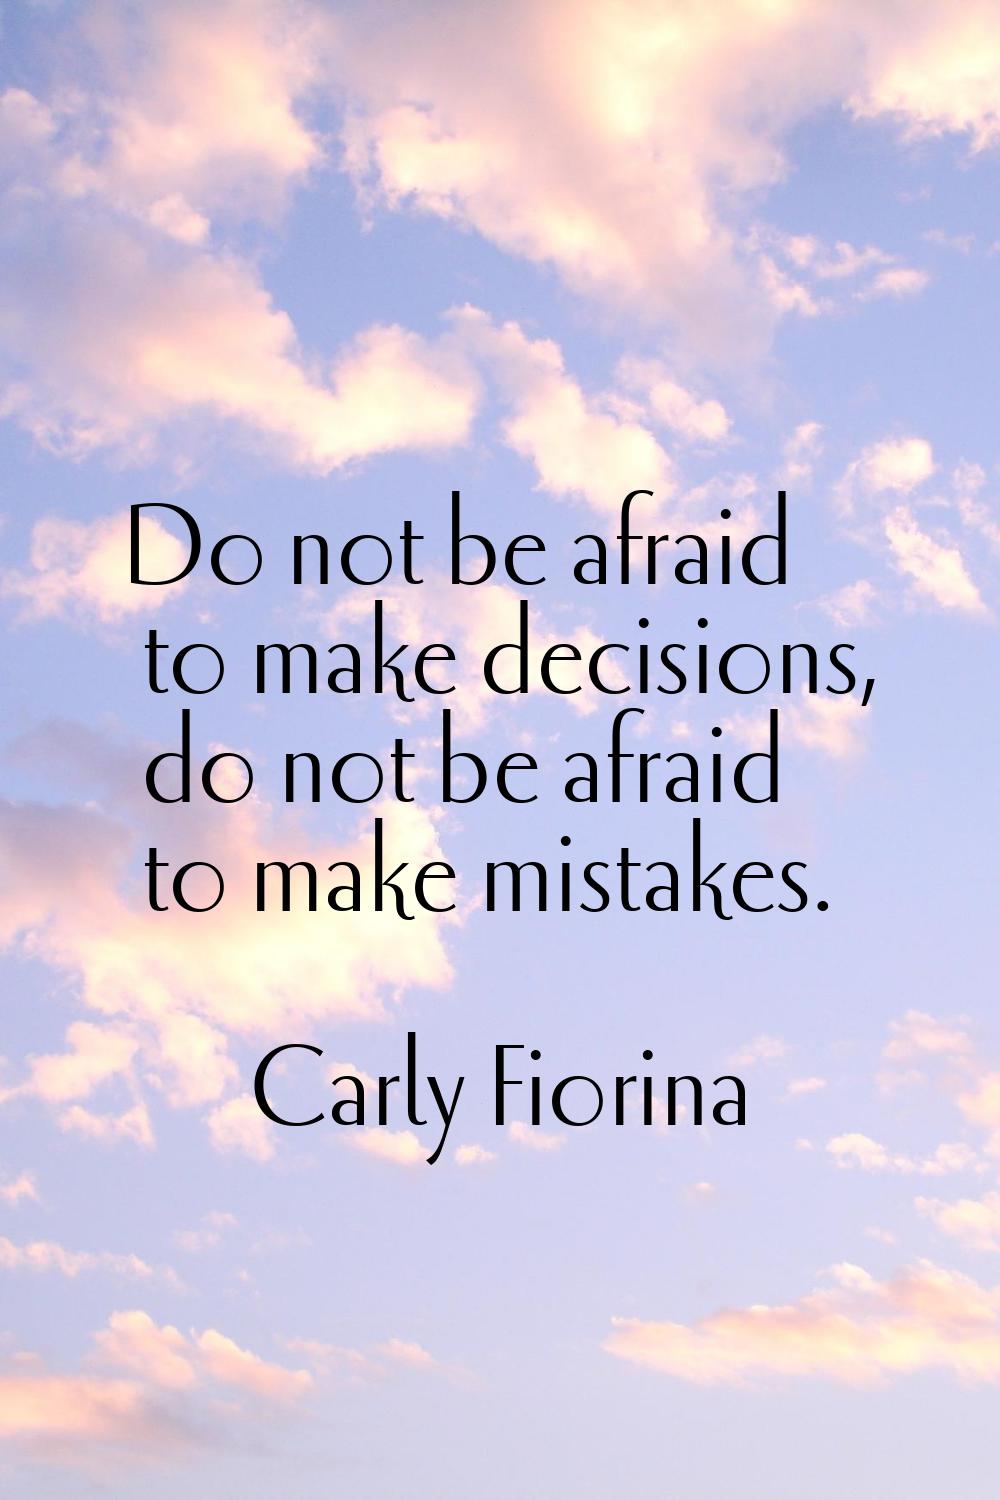 Do not be afraid to make decisions, do not be afraid to make mistakes.